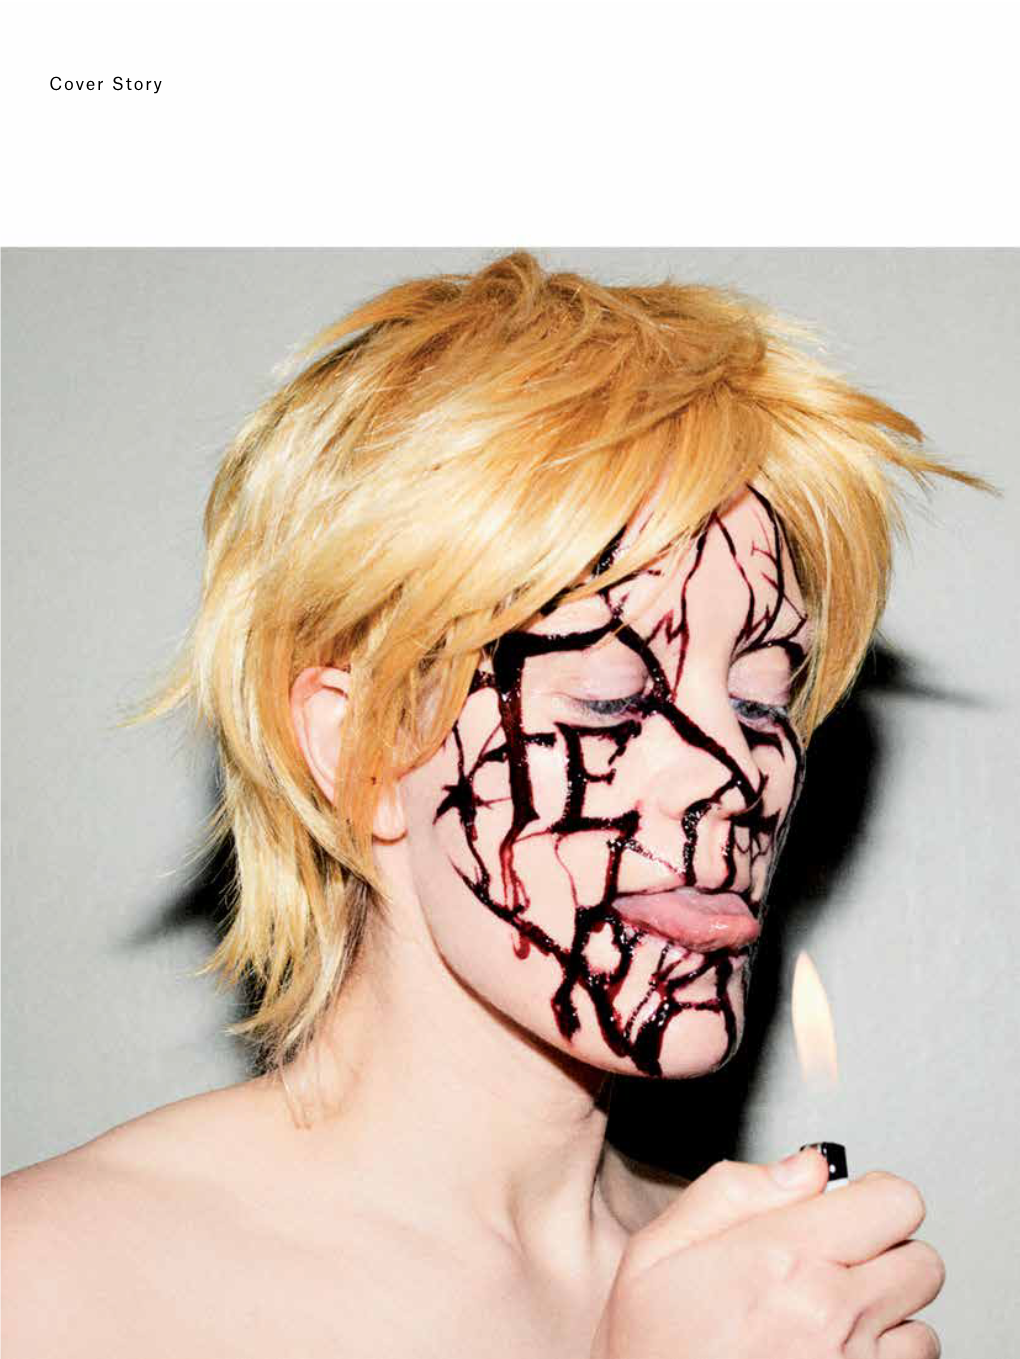 Cover Story 18 / 19 Side a Fever Ray